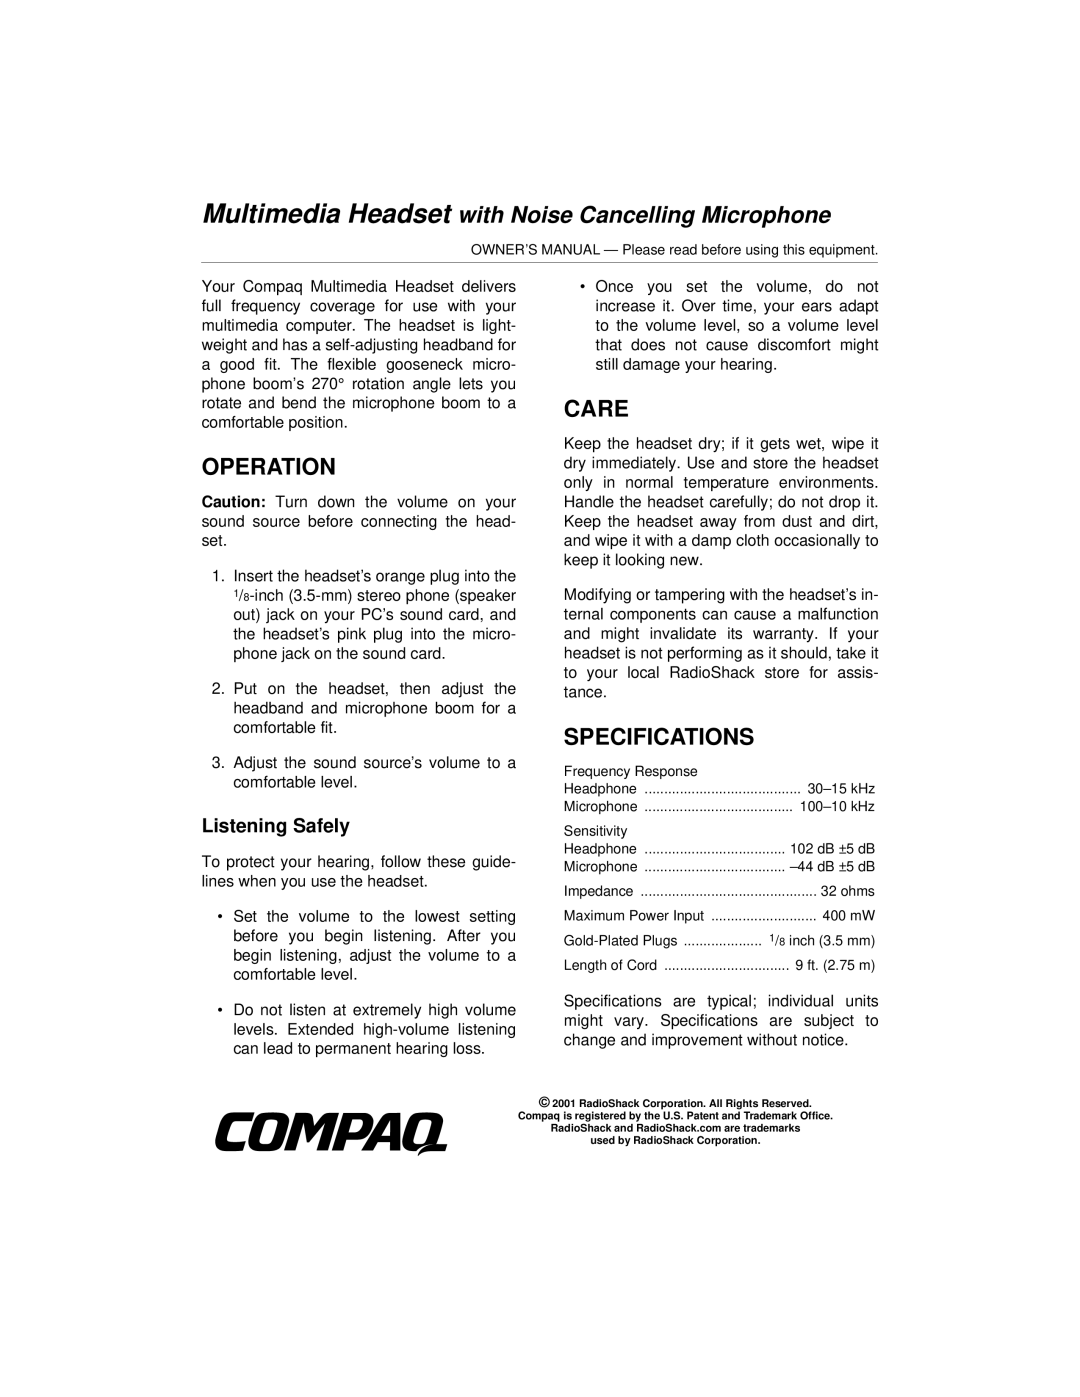 DeWalt 06A01 specifications Operation, Care, Specifications, Listening Safely 